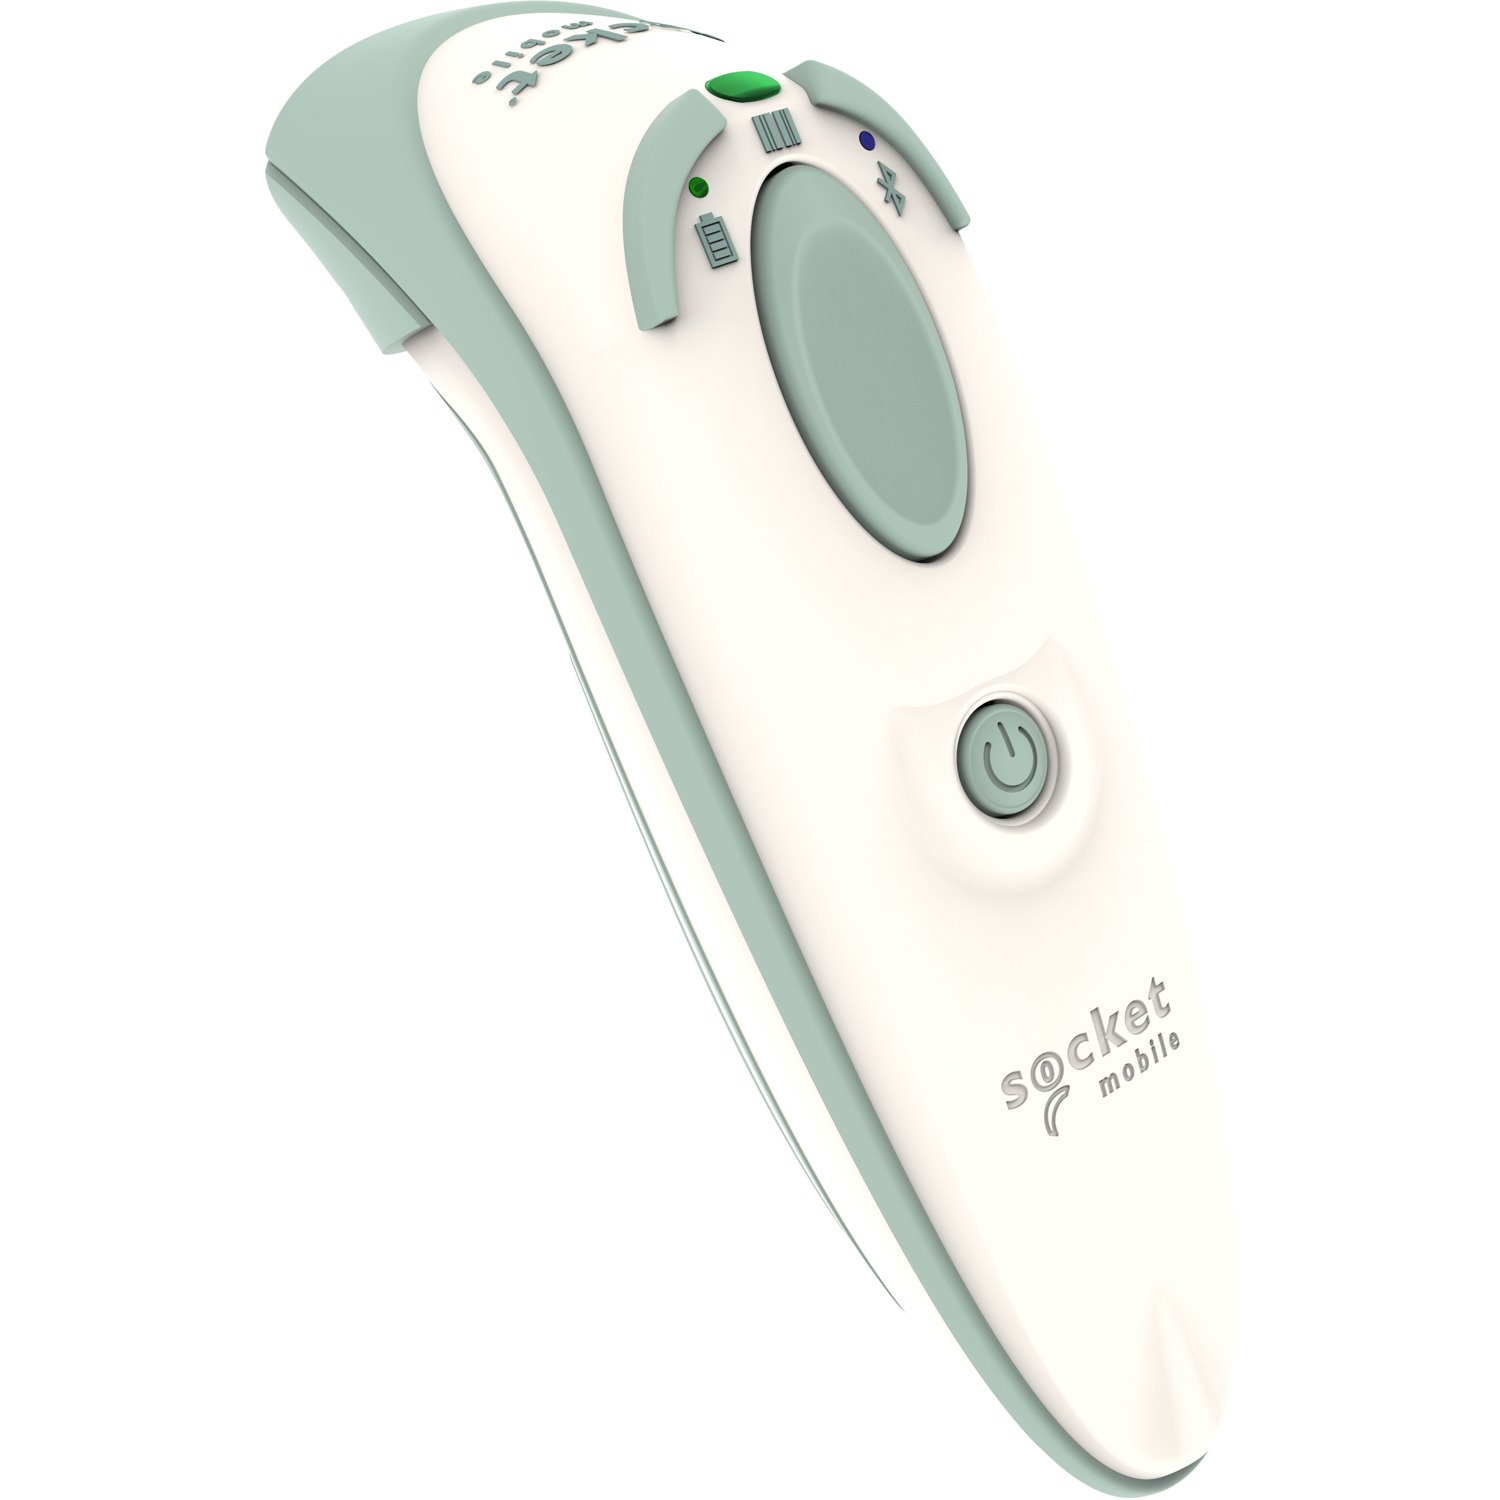 Socket Mobile DuraScan D755 Healthcare Handheld Barcode Scanner - Wireless Connectivity - White